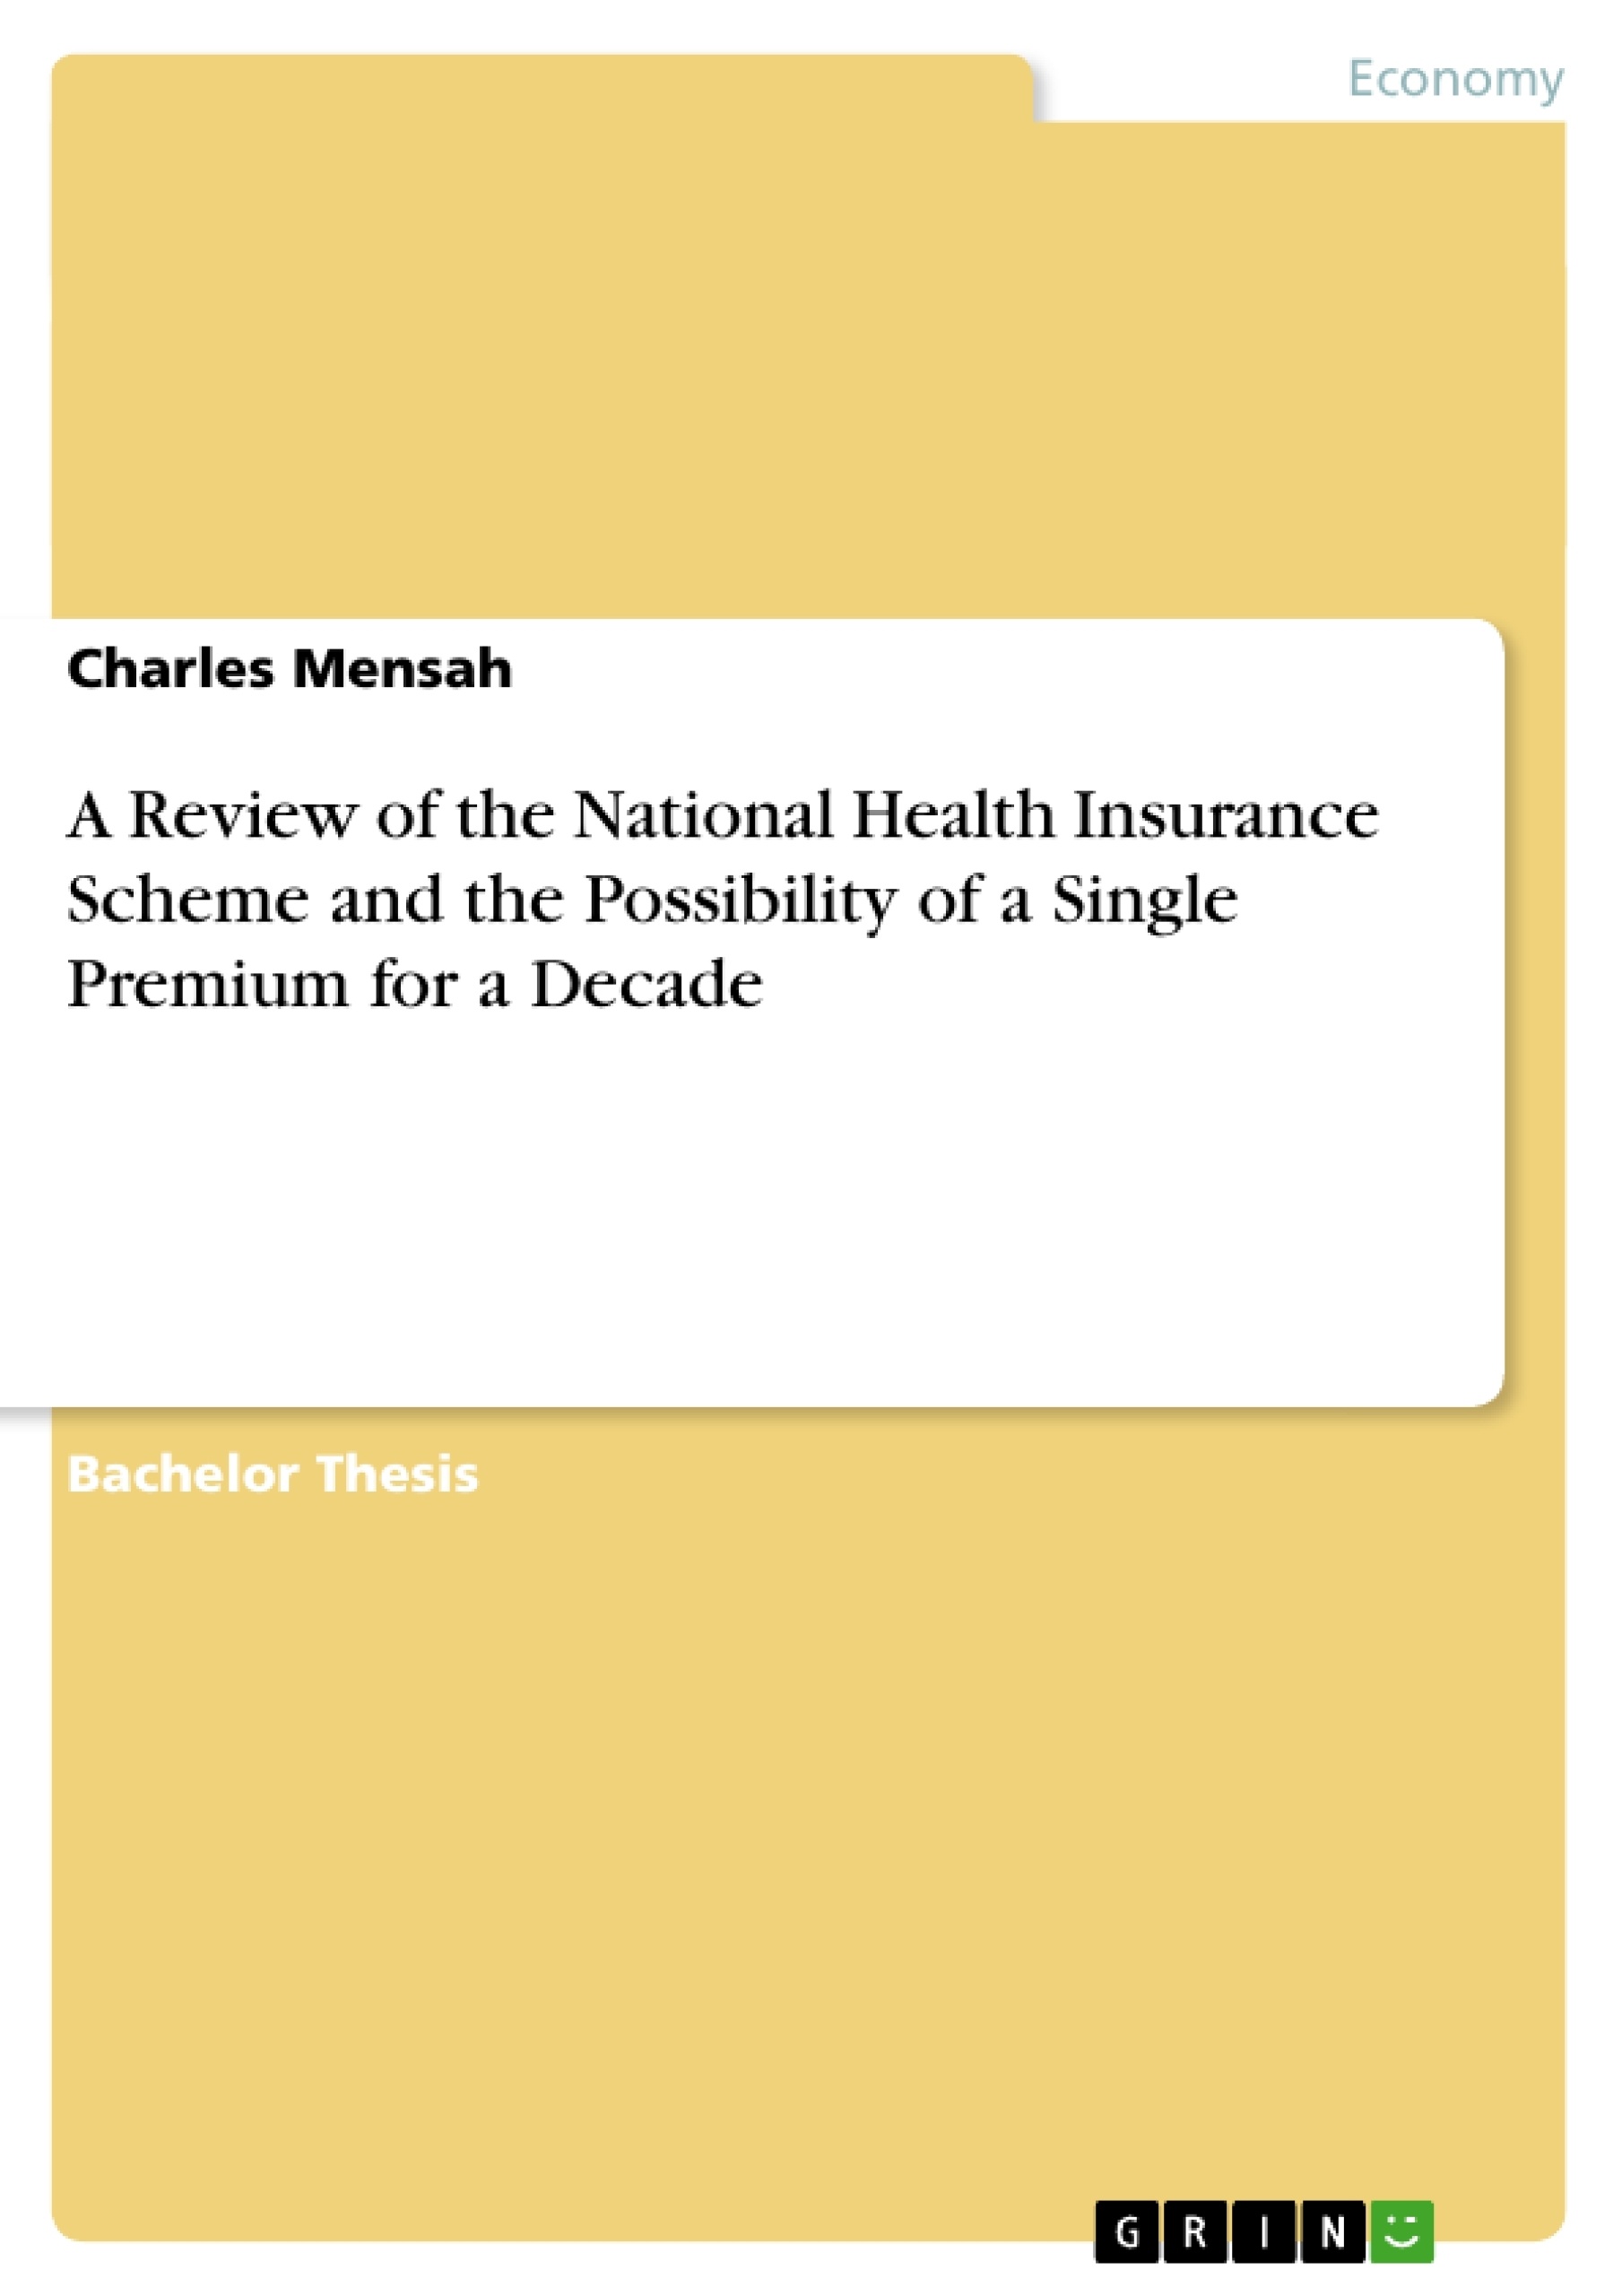 Título: A Review of the National Health Insurance Scheme and the Possibility of a Single Premium for a Decade